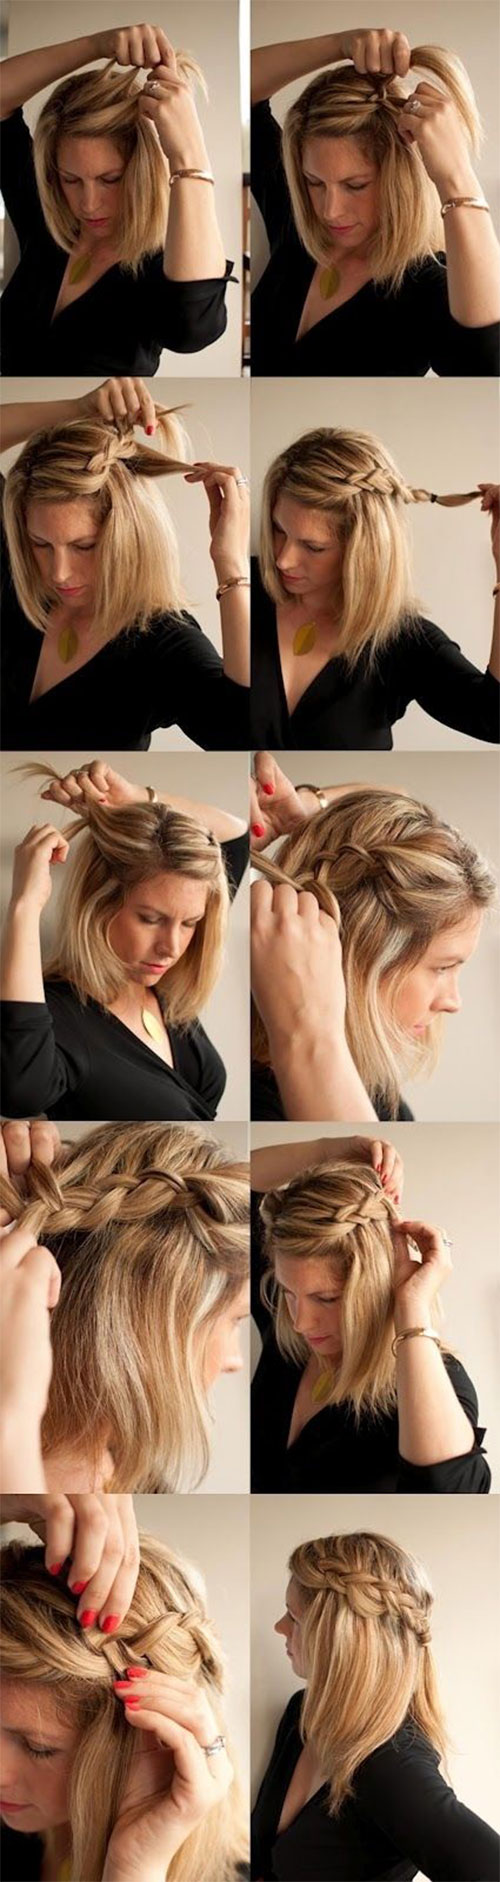 20 Easy Step By Step Summer Braids Style Tutorials For